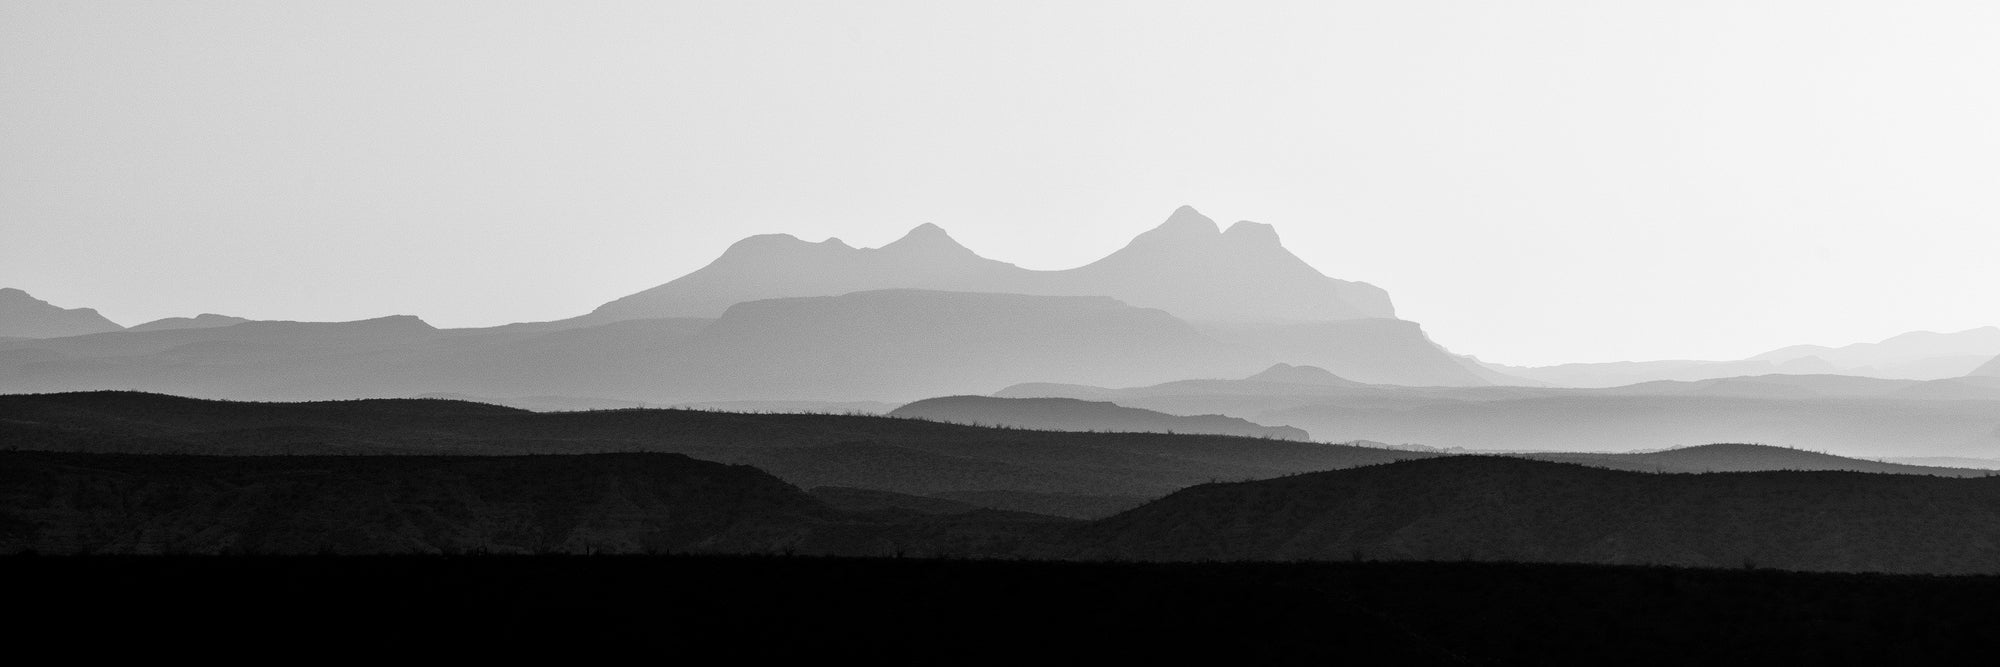 Hazy Mountain Sunrise Panorama: Black and White Landscape Photograph by Keith Dotson. Buy a fine art print.